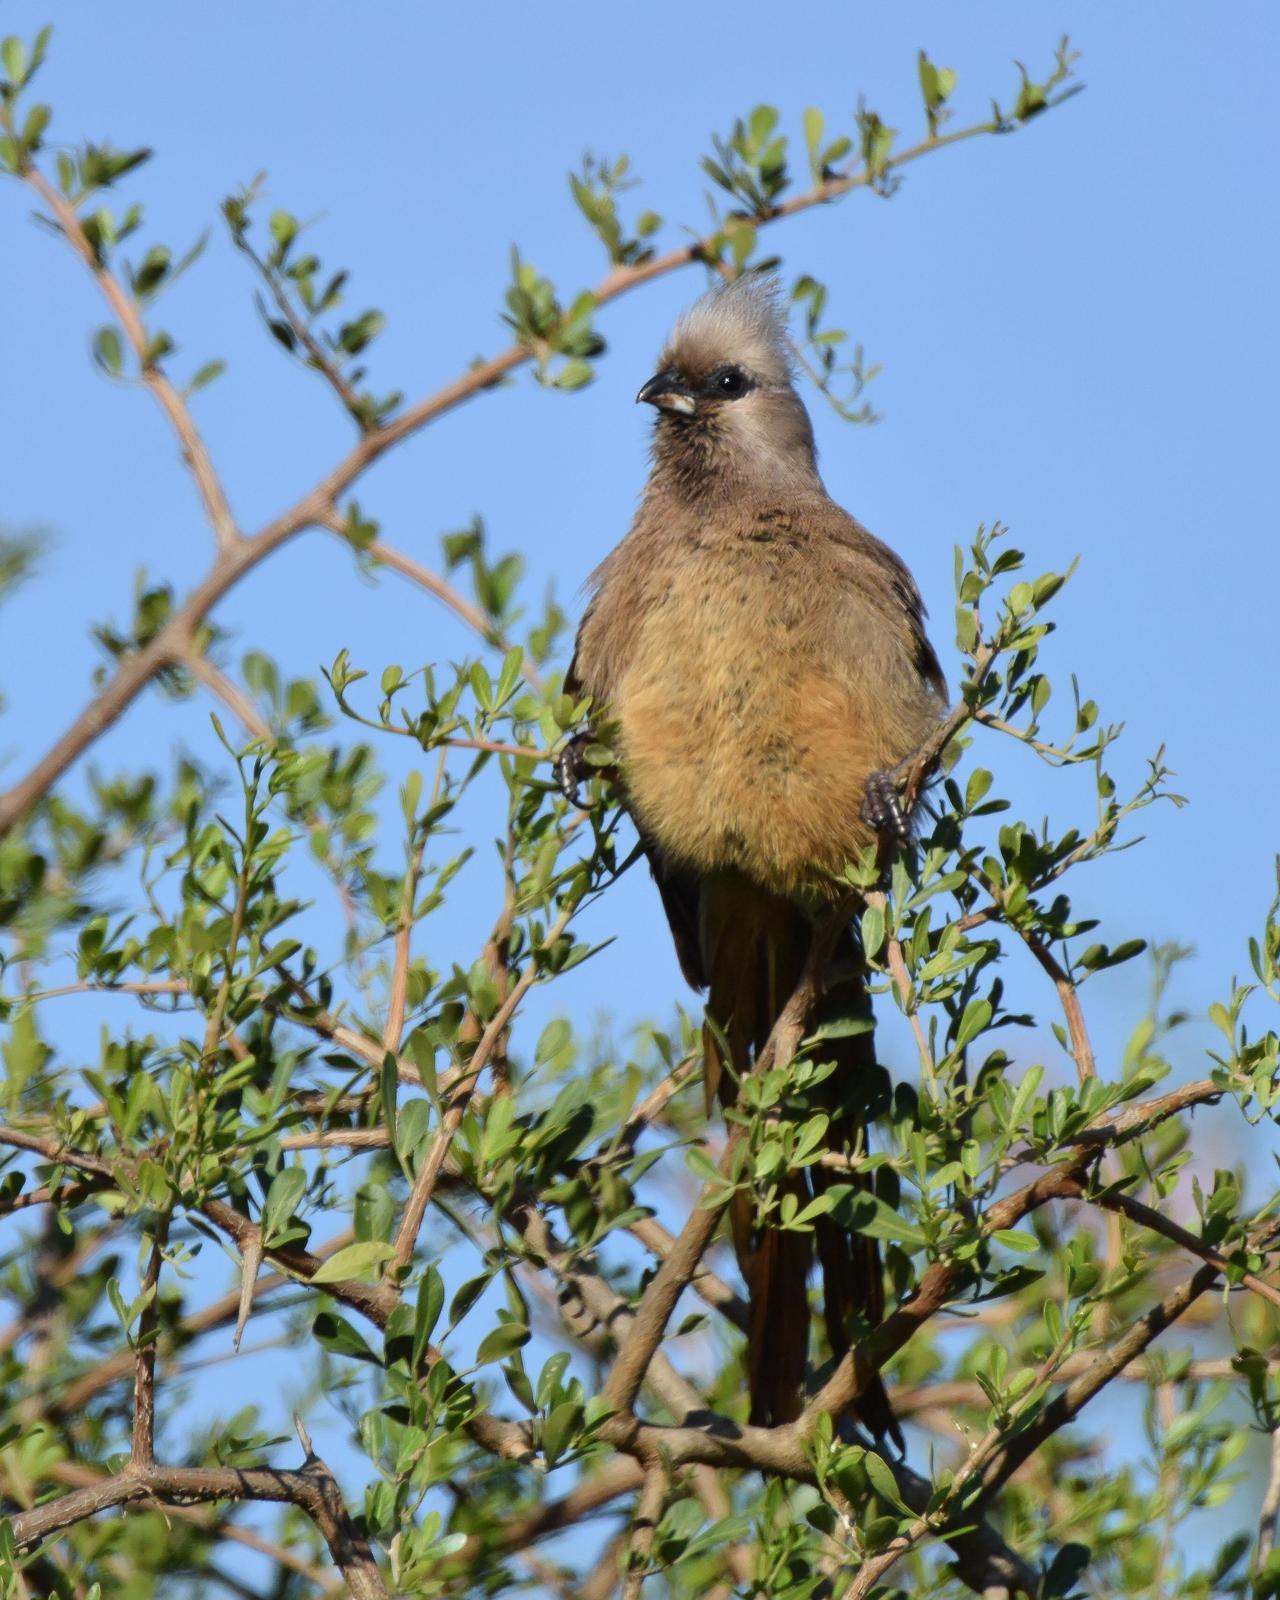 Speckled Mousebird Photo by Steve Percival